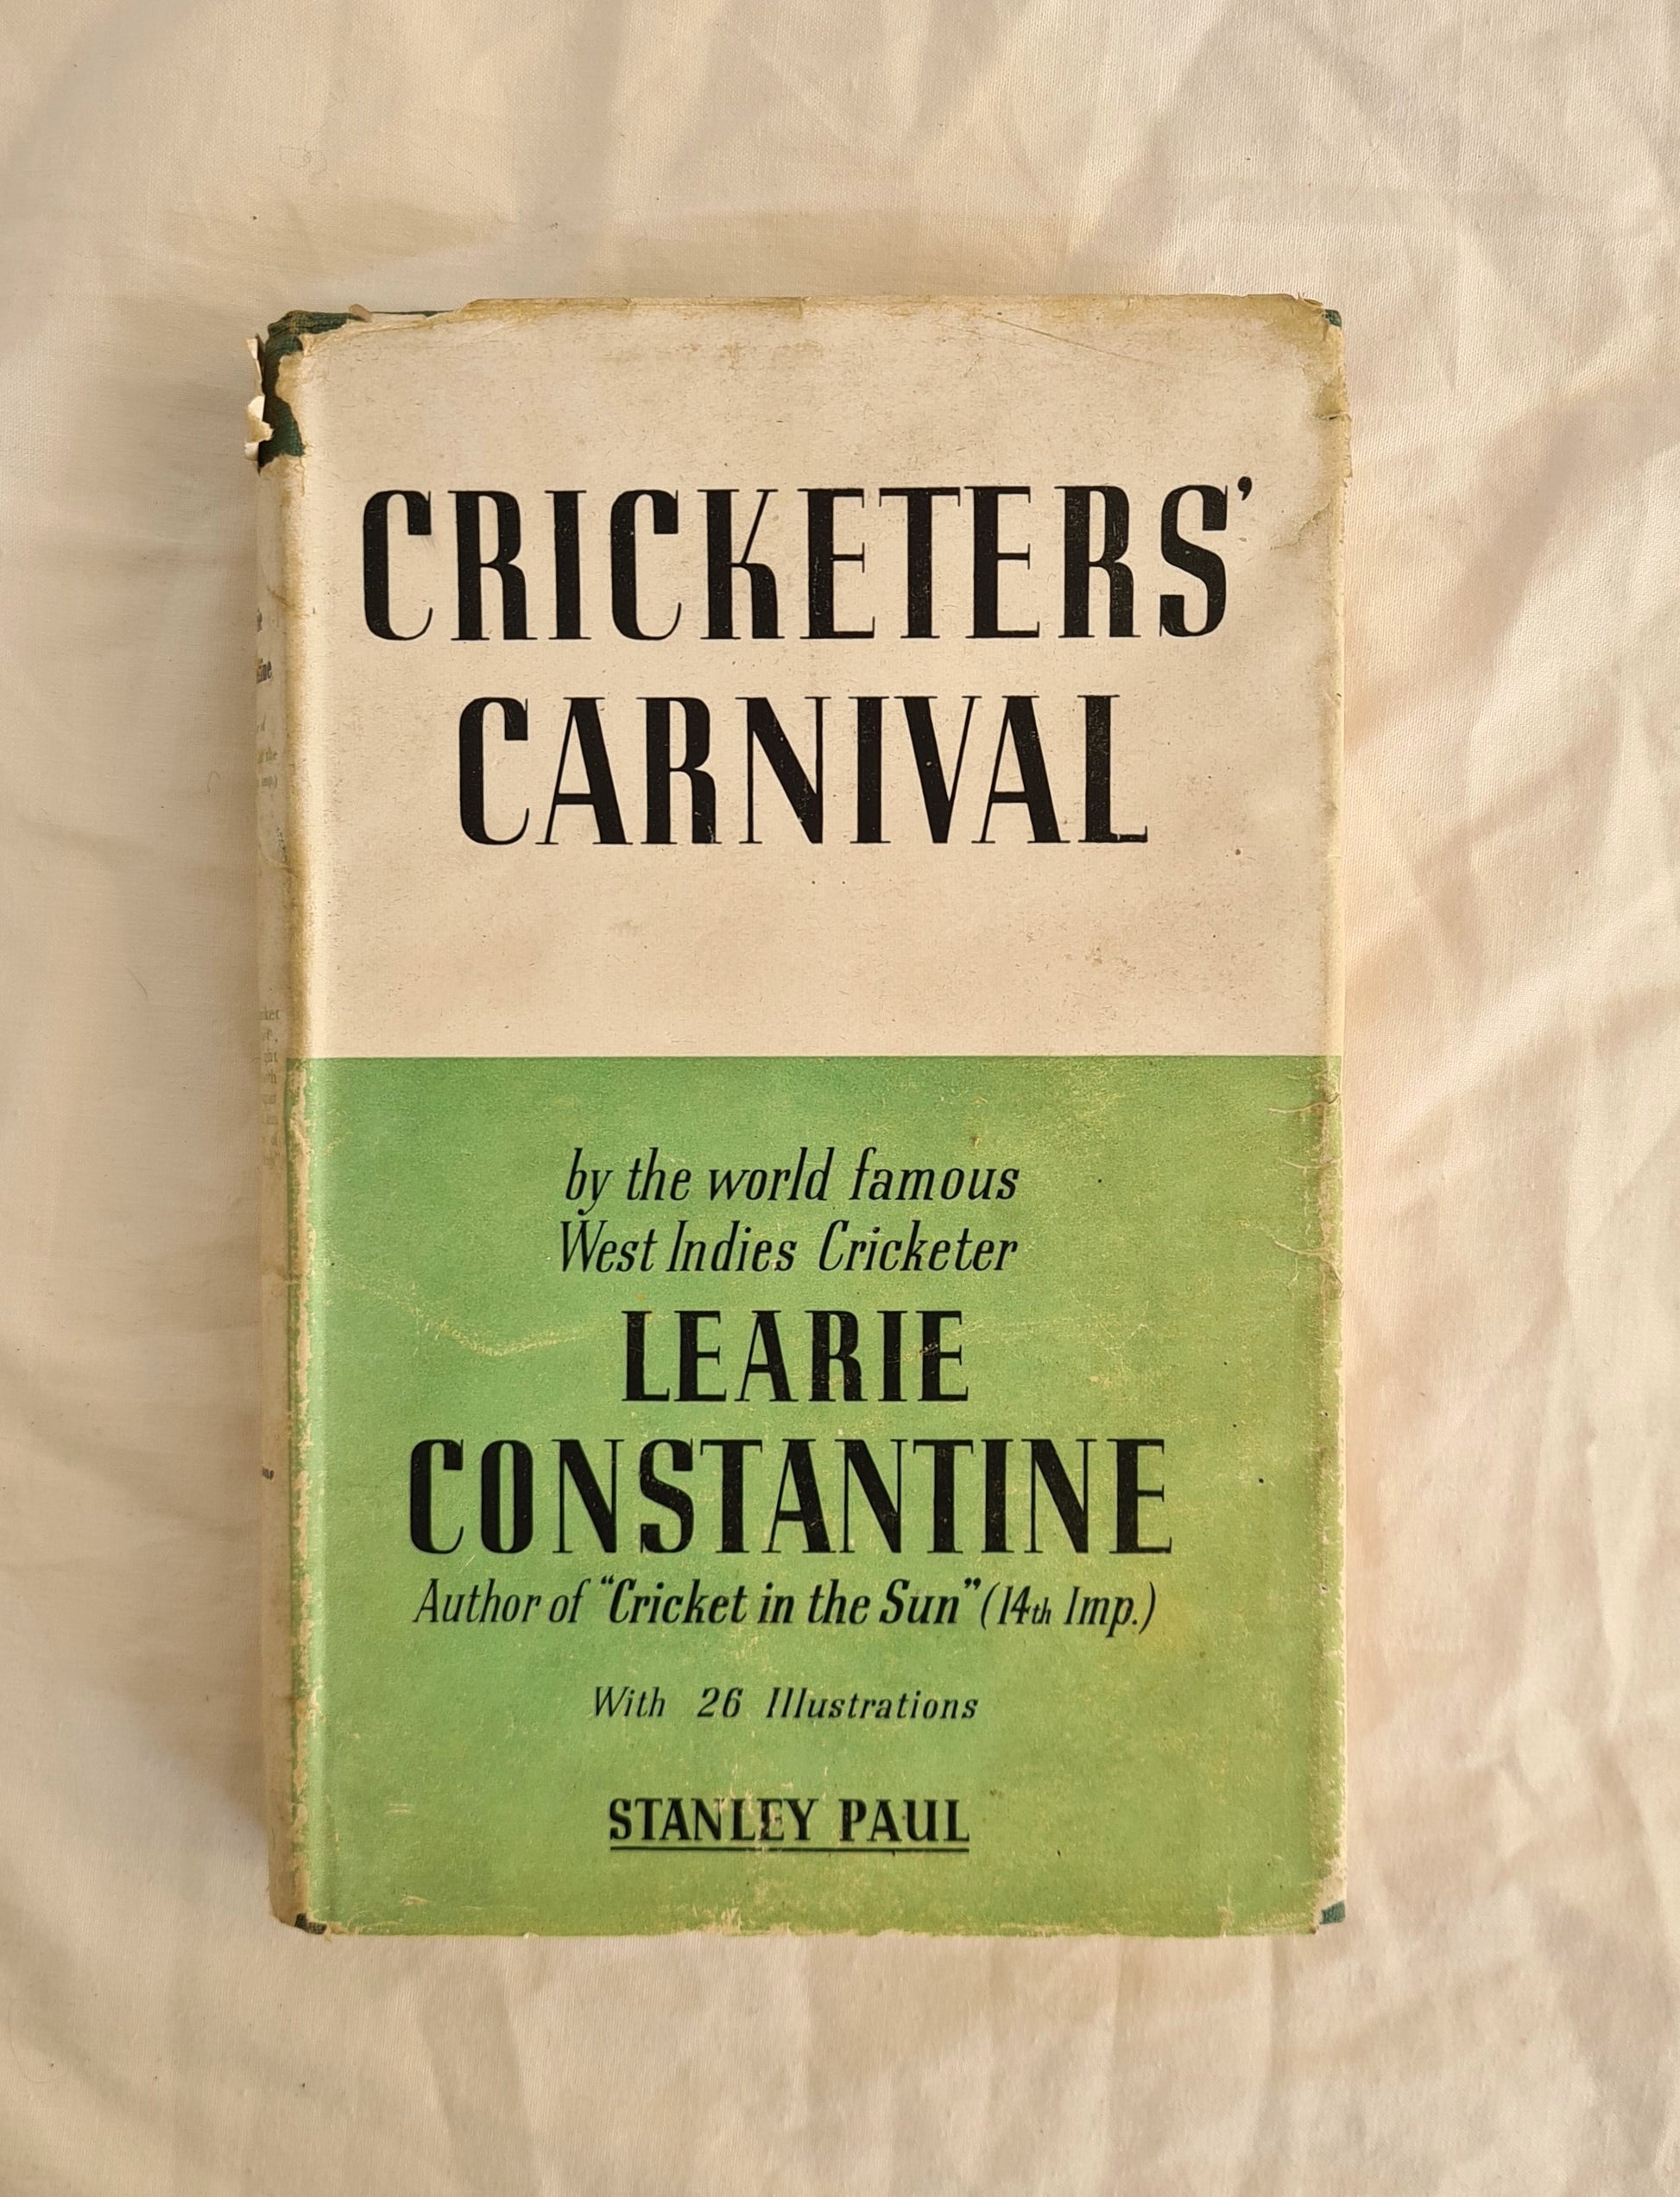 Cricketers’ Carnival by Learie Constantine